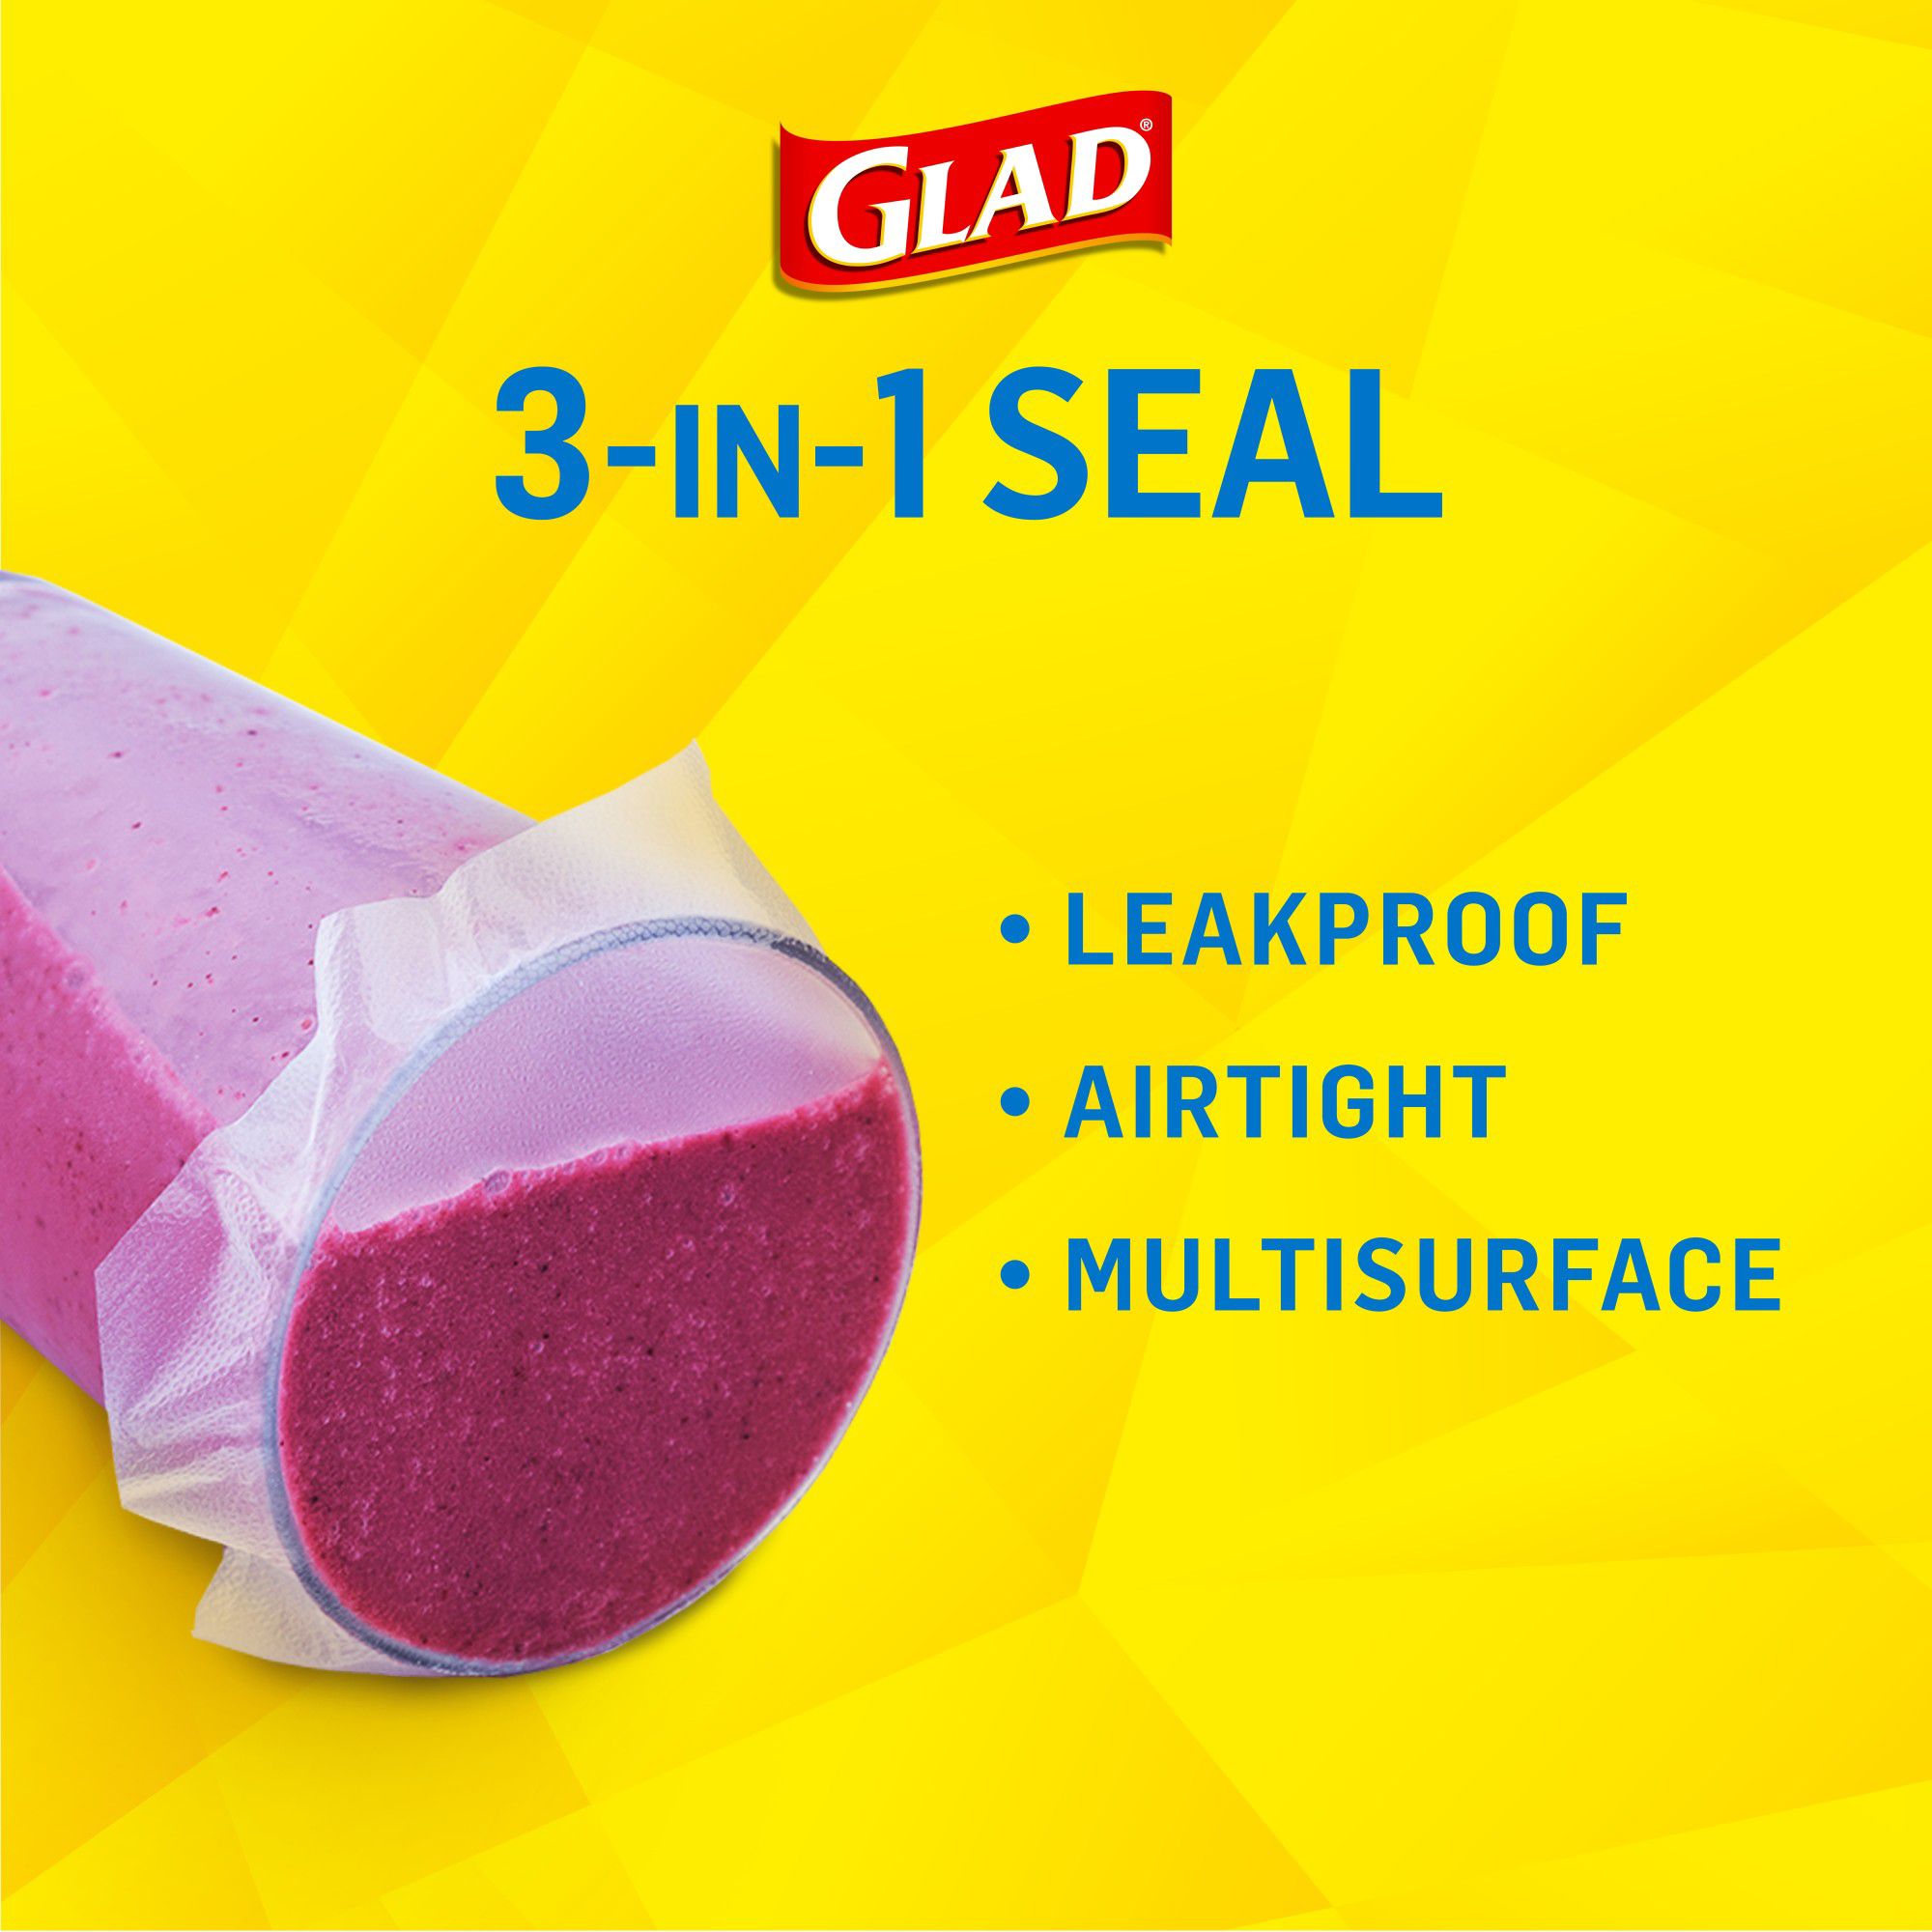 Glad Cling Plastic Wrap, 400 ft. Roll, Clear